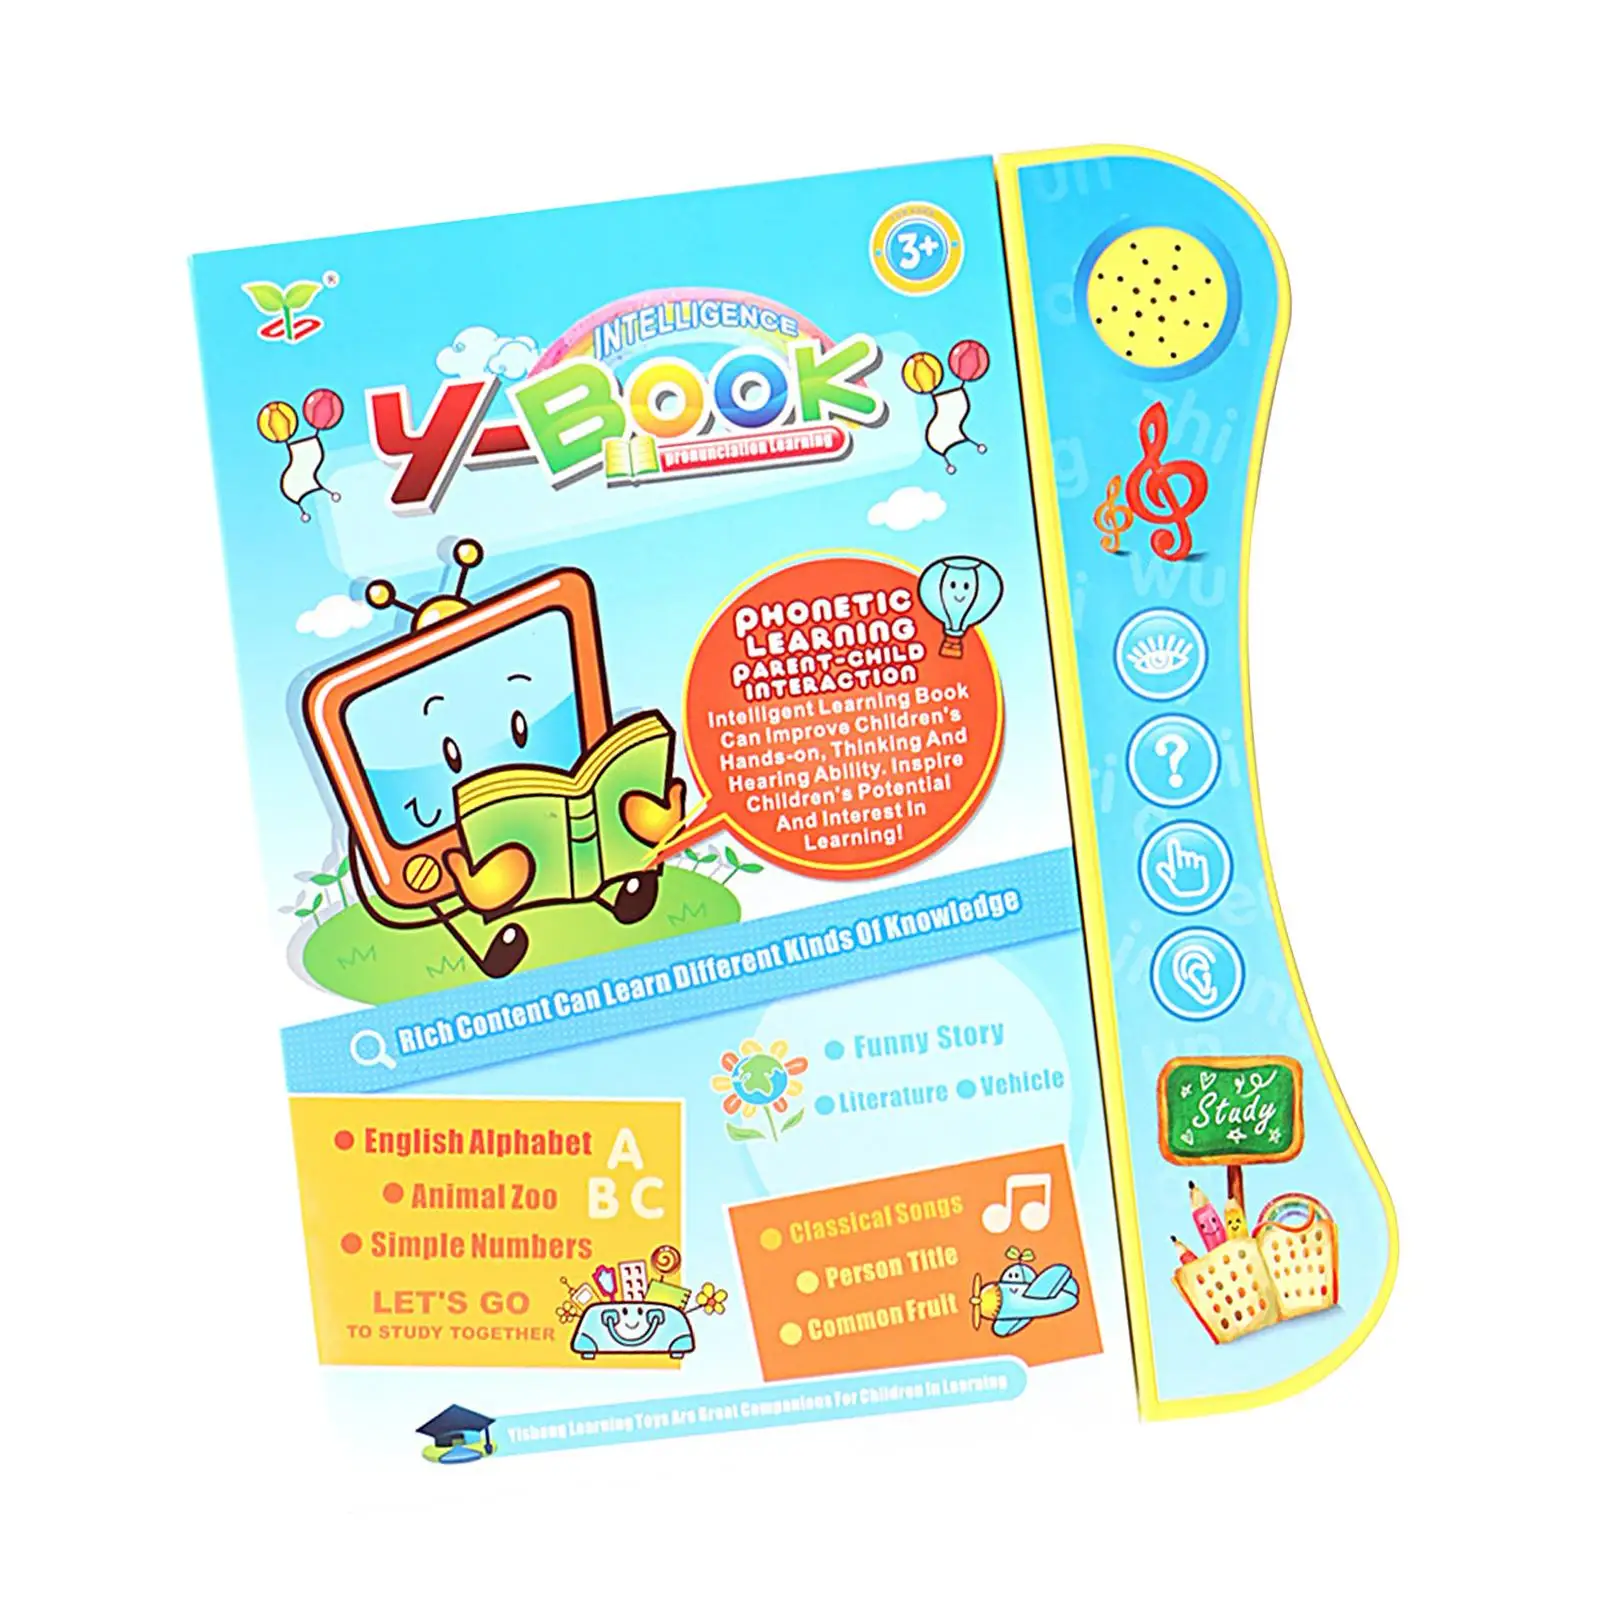 English interactive Gift sound book for Baby for Character Appellation